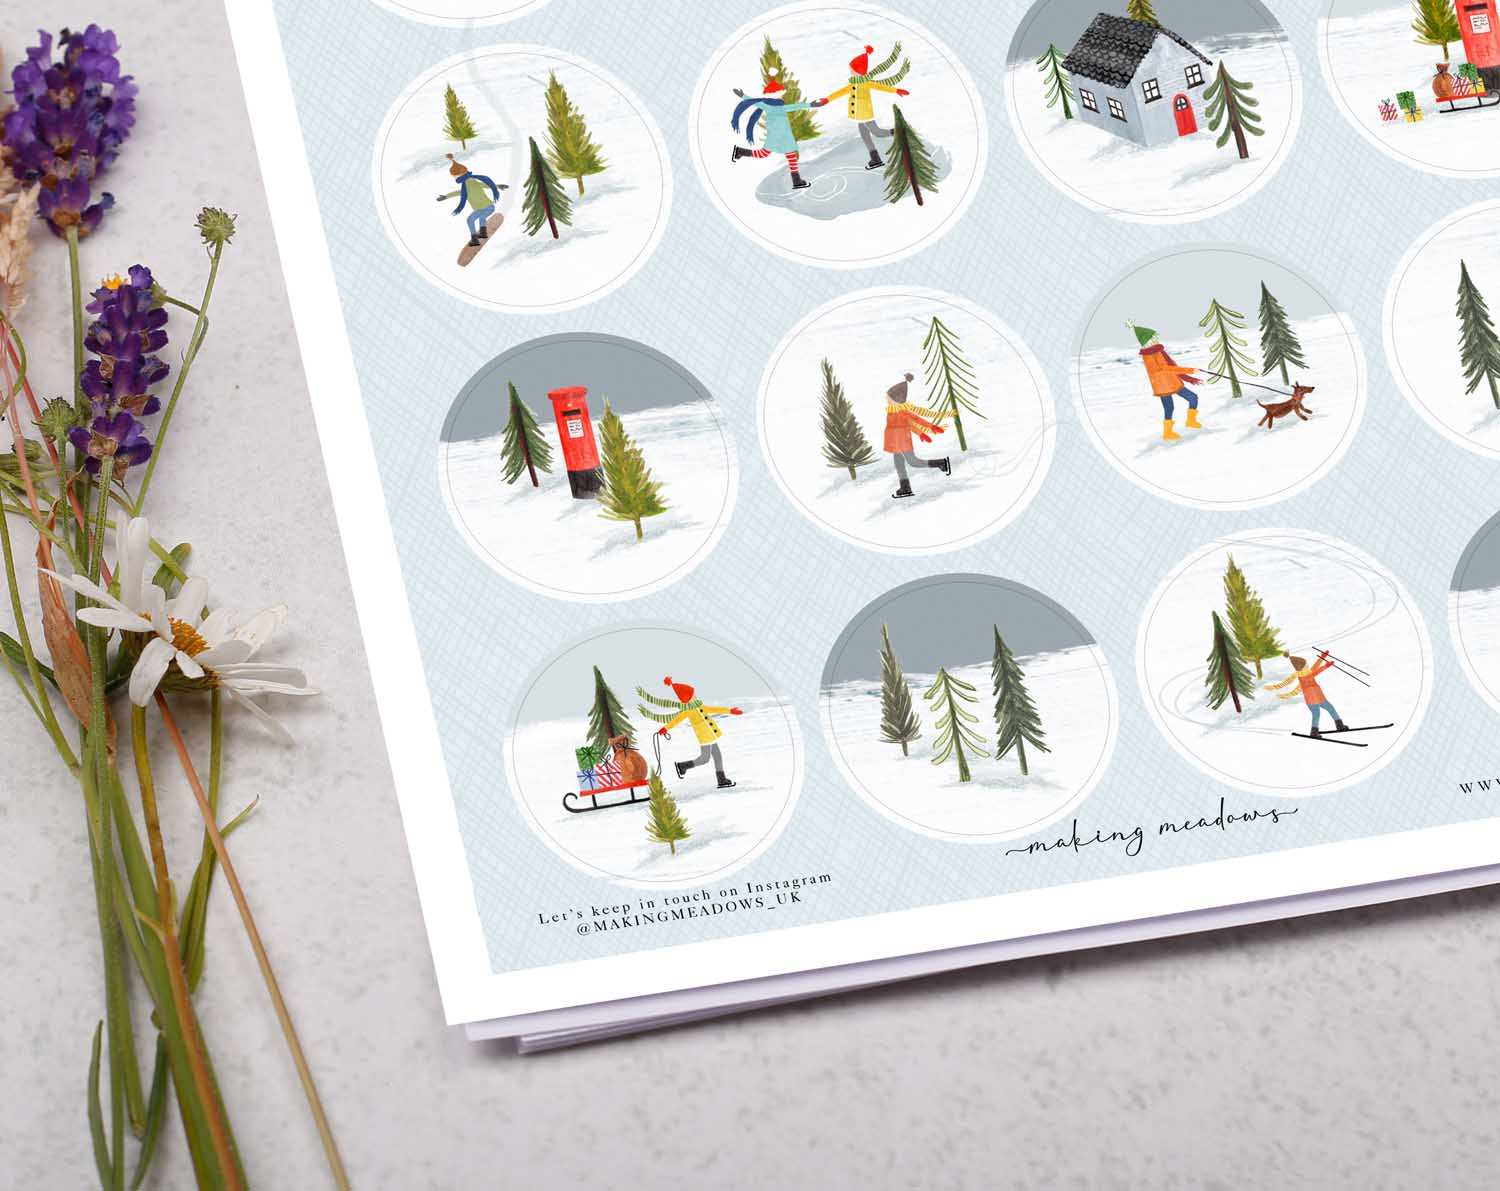 These lovely Christmas village sticker sheets are A4 sized. On each sticker sheet is 24 circle stickers. Each sticker measures 4cm diameter.